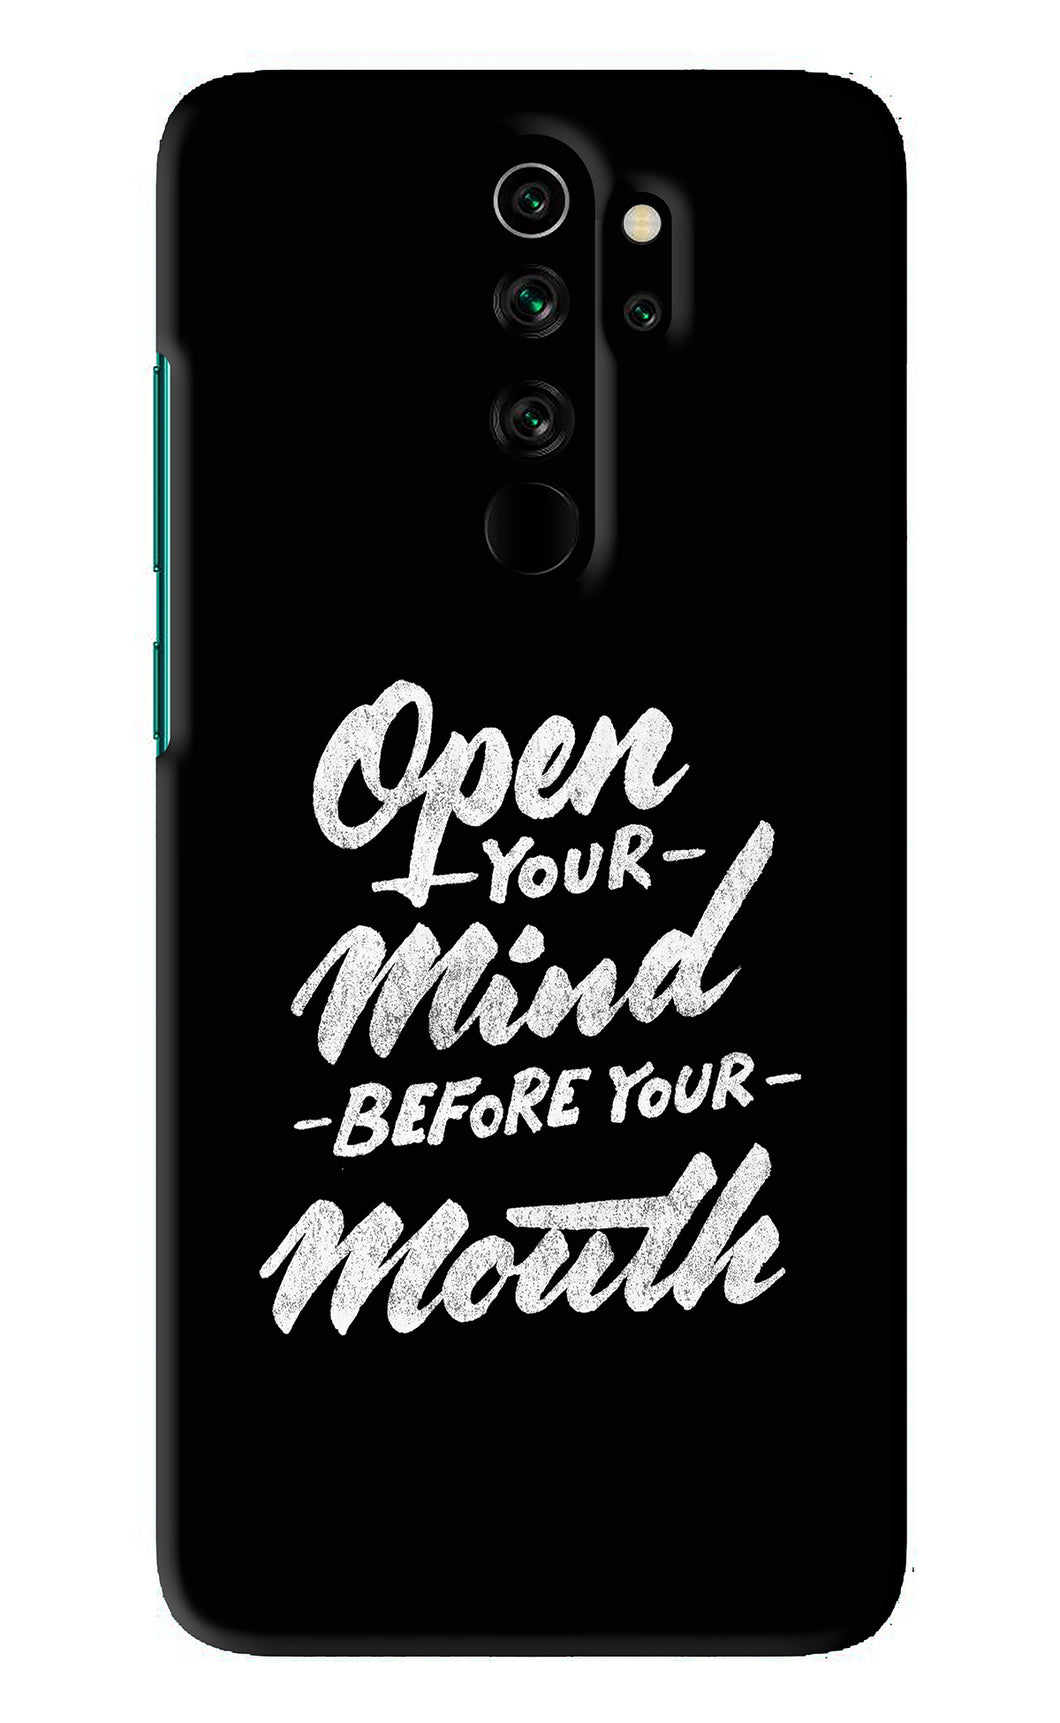 Open Your Mind Before Your Mouth Xiaomi Redmi Note 8 Pro Back Skin Wrap